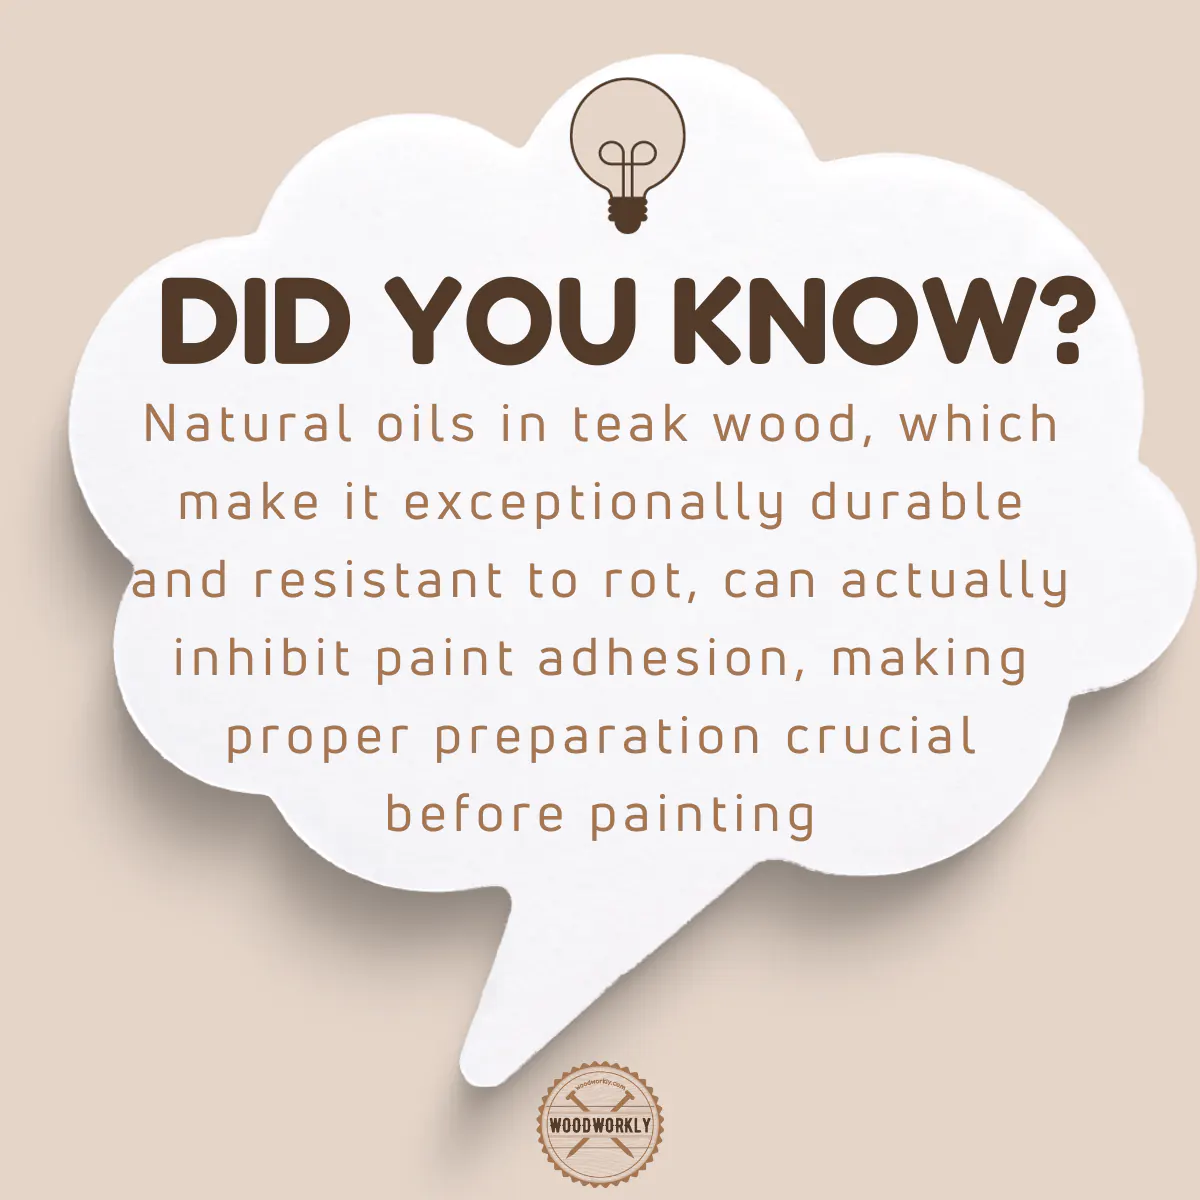 Did you know fact about painting teak wood